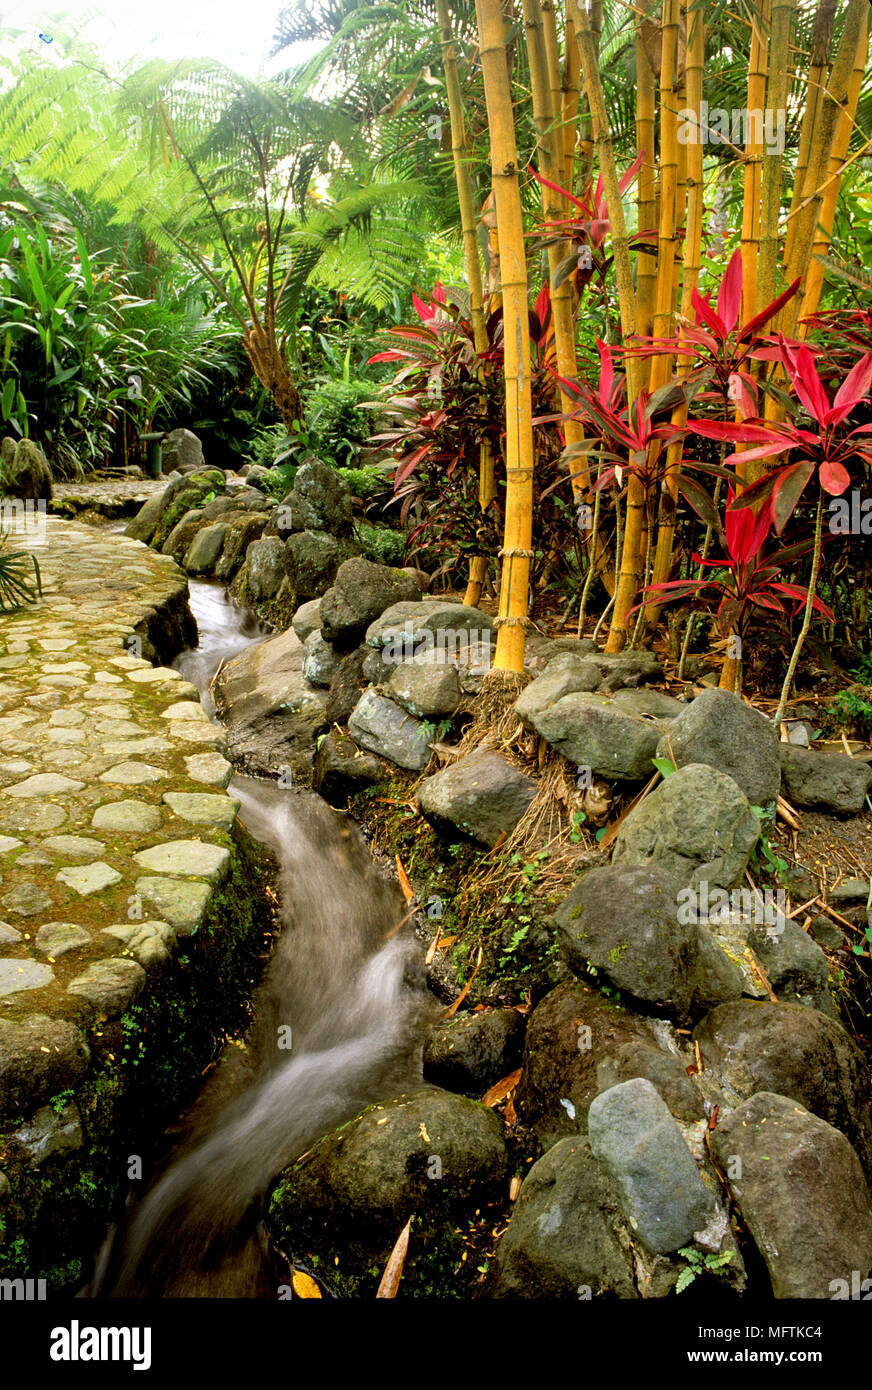 Rocky garden with a planting of Bambusa vulgaris and Cordyline terminalis Stock Photo